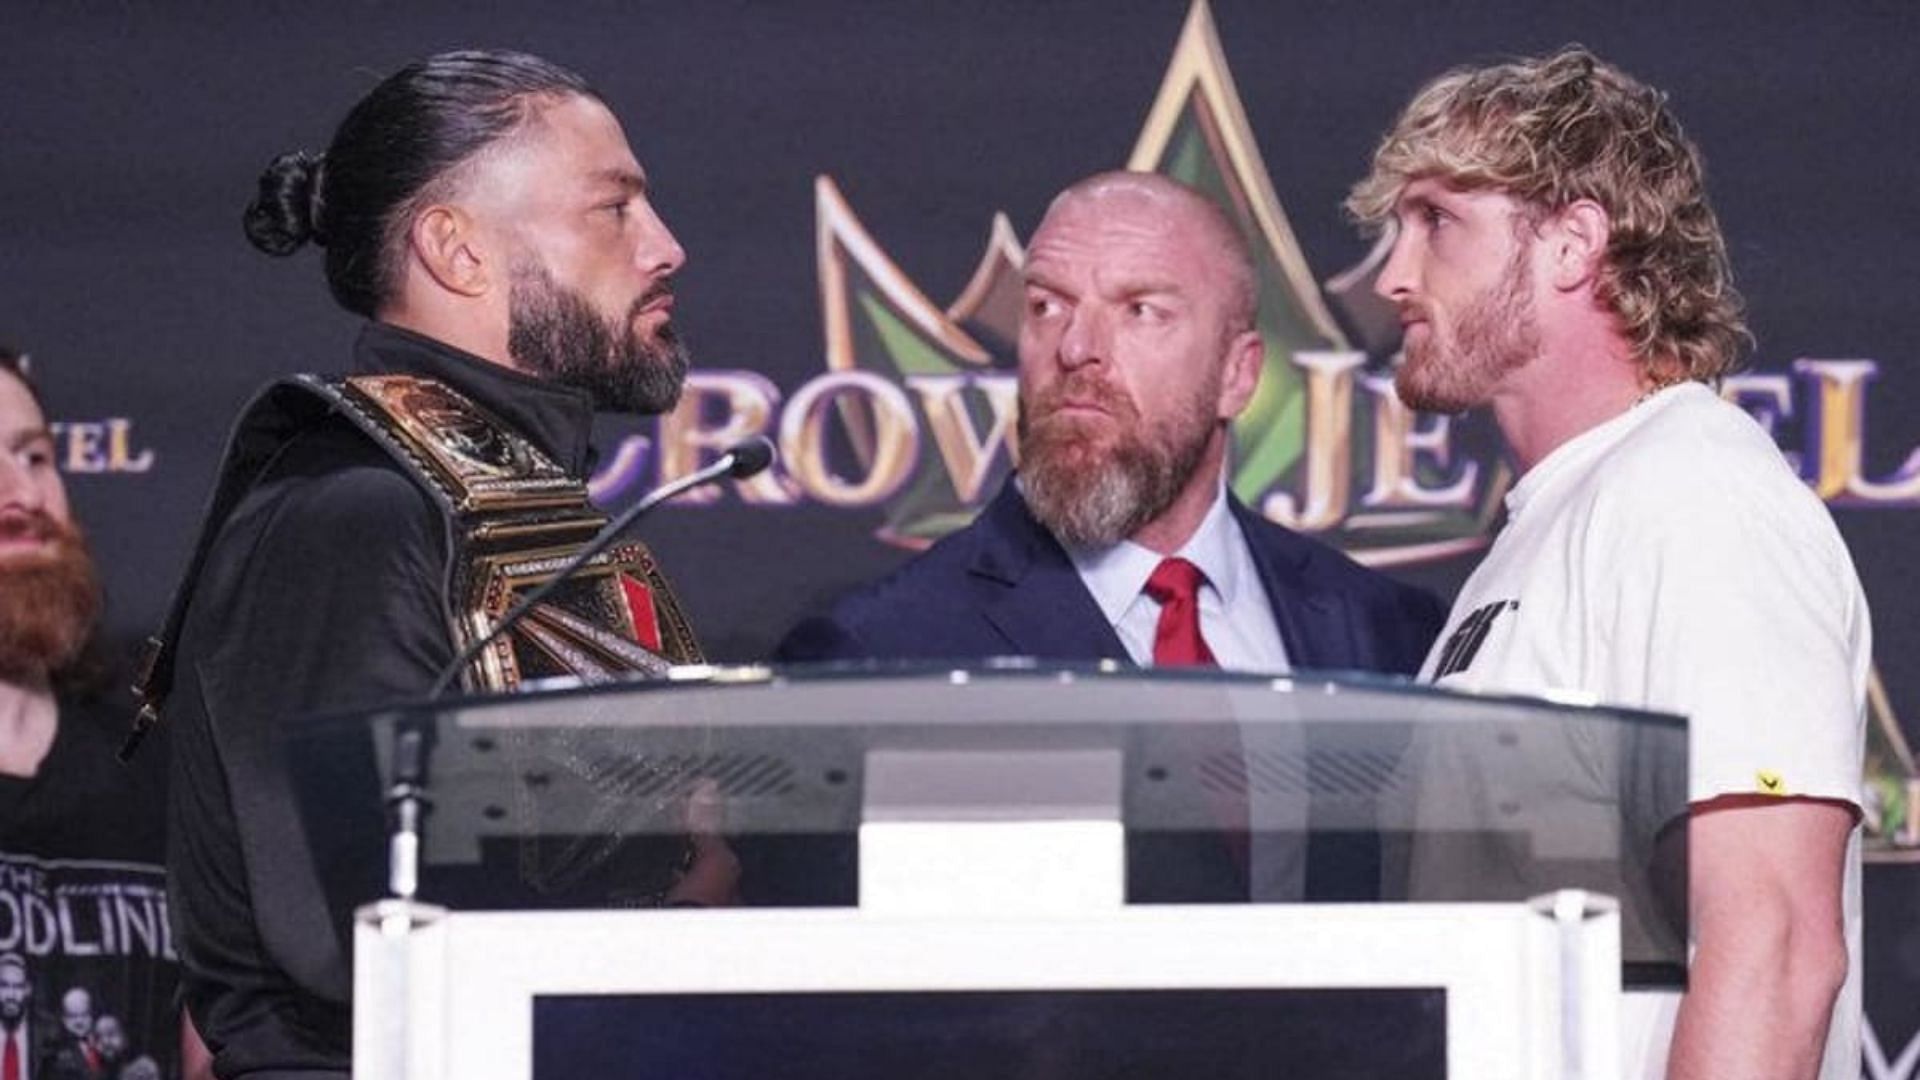 "He's had two fu**ing matches" - WWE veteran explains if Logan Paul should dethrone Roman Reigns at Crown Jewel